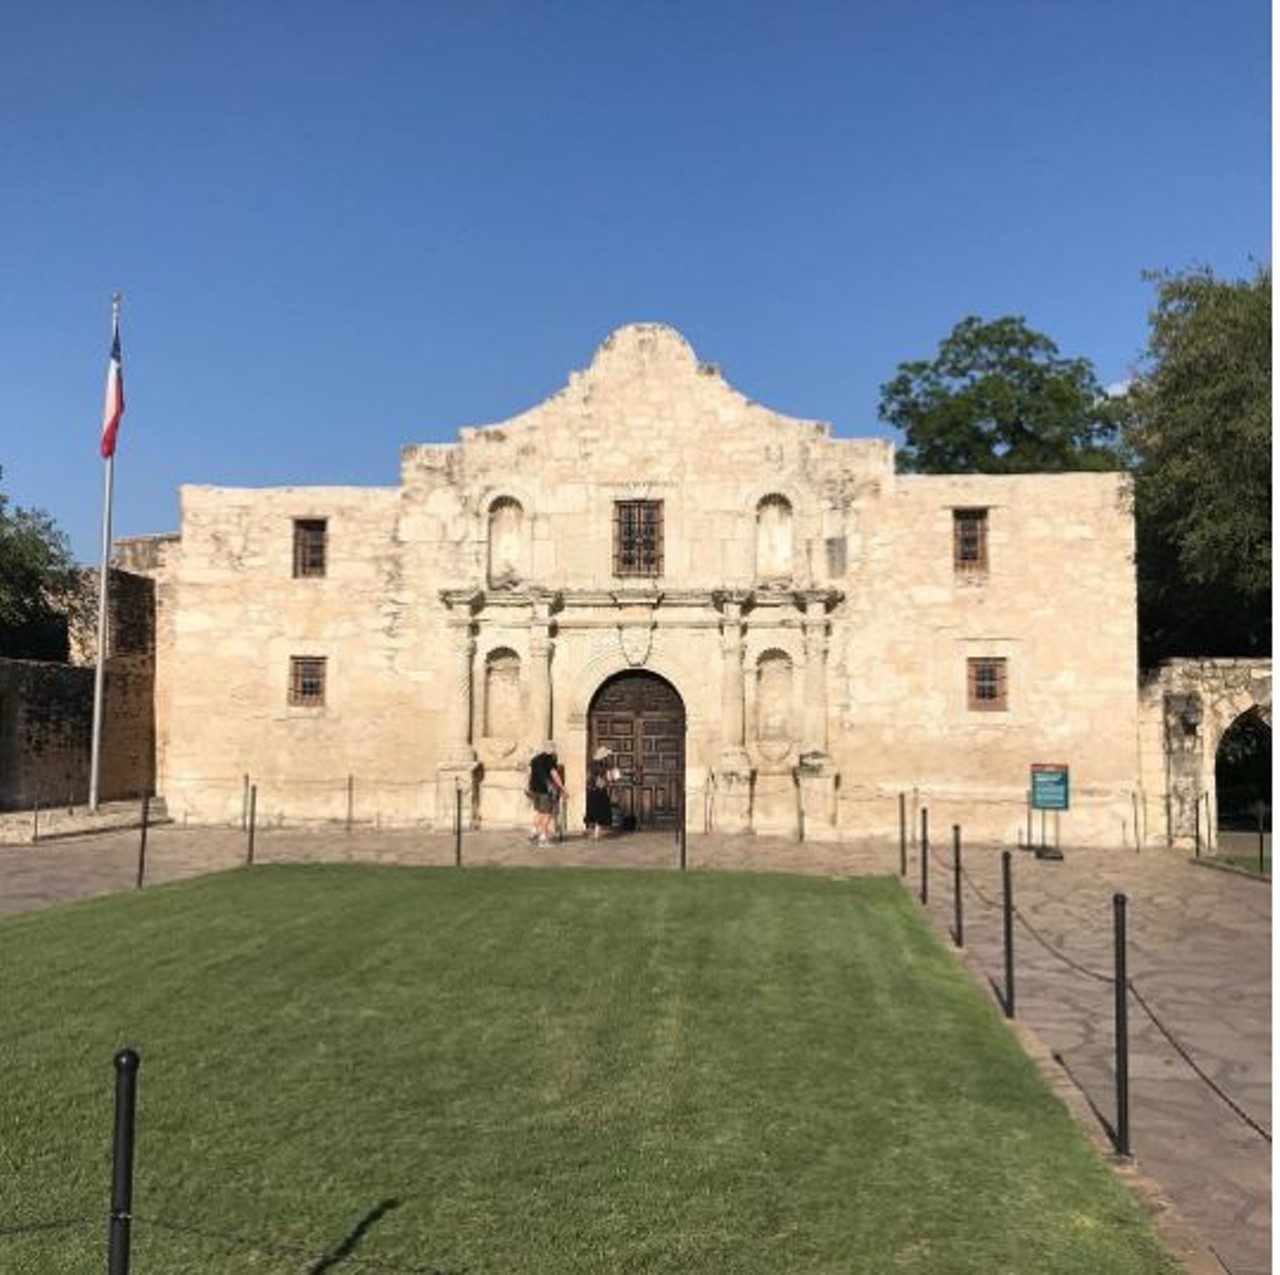 Visit the Alamo
(210) 225-1391, 300 Alamo Plaza, 
thealamo.org
This might be such a touristy sight, but it is free and everyone loves the Alamo. Guided tours are available at a price. 
Photo via Instagram 
charlie__waters
